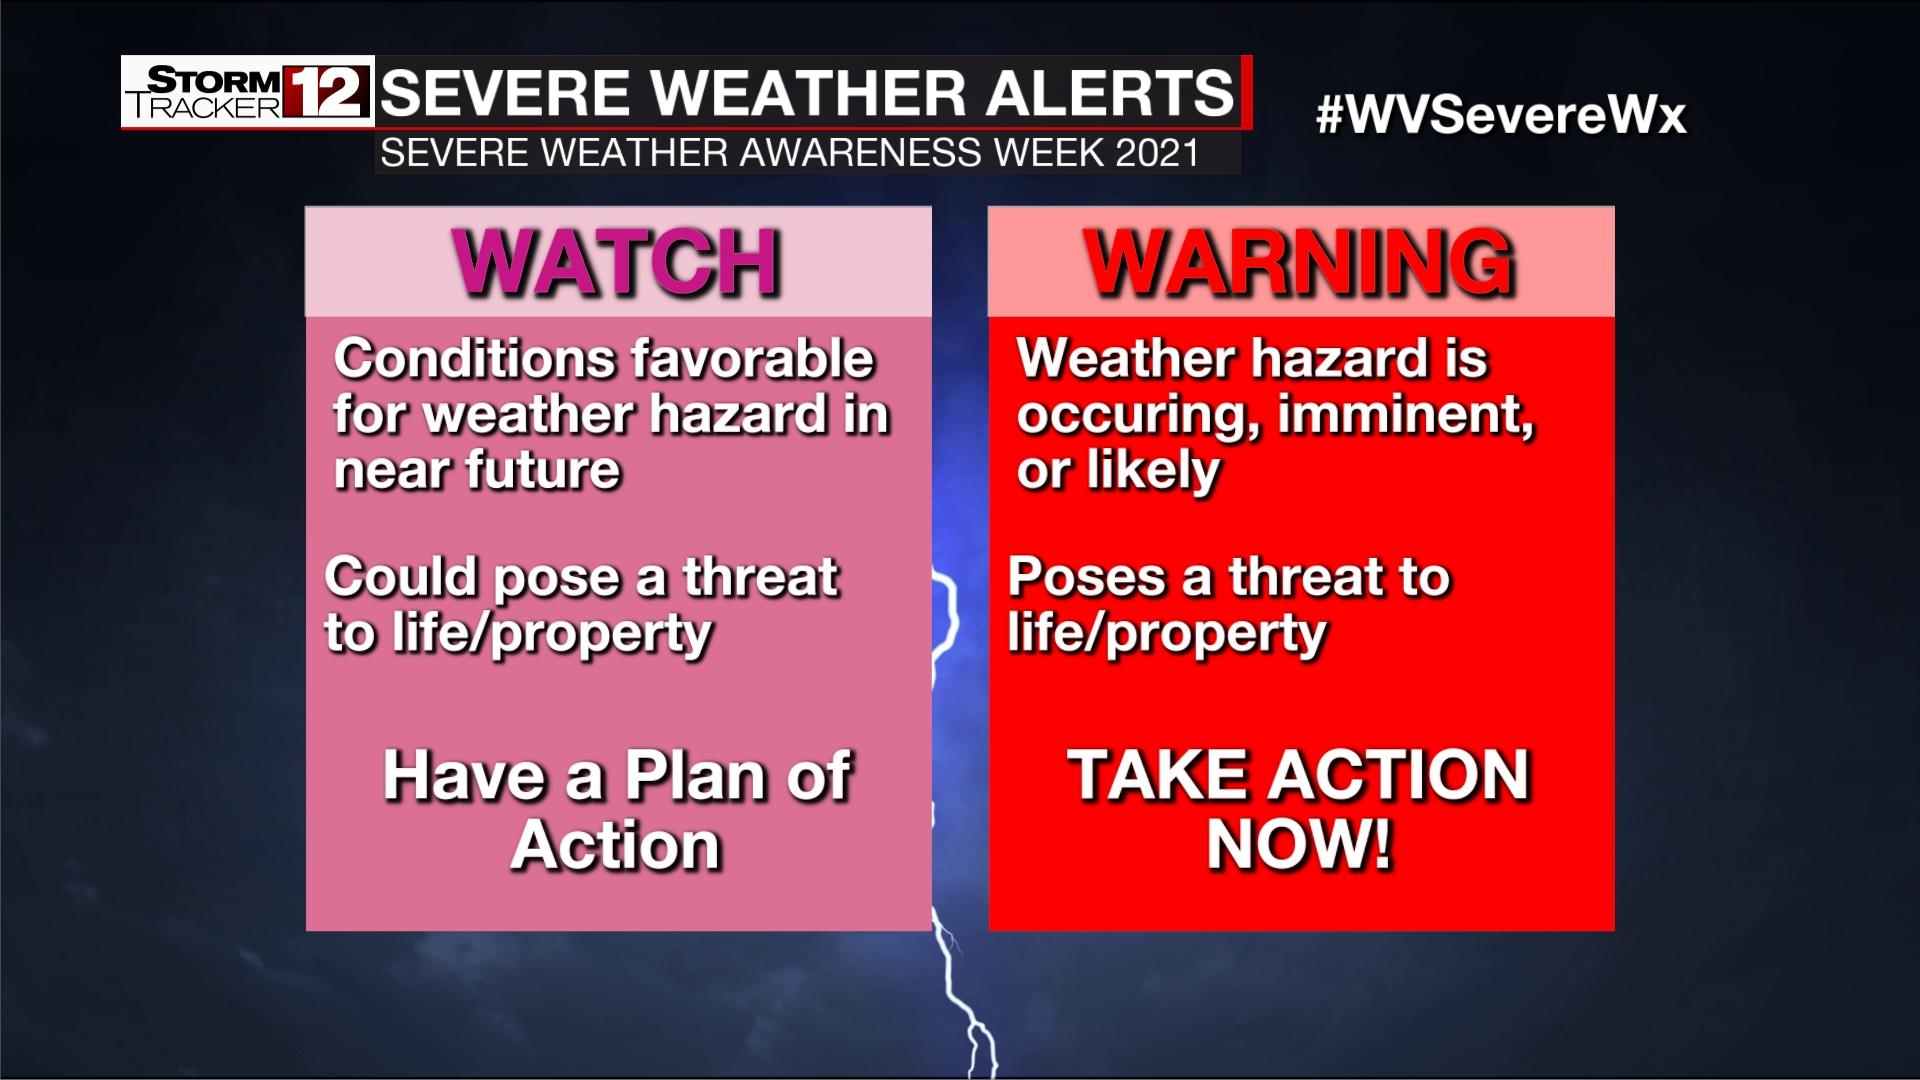 Accessibility and Dissemination - Severe Weather Alerts and Preparedness Tips